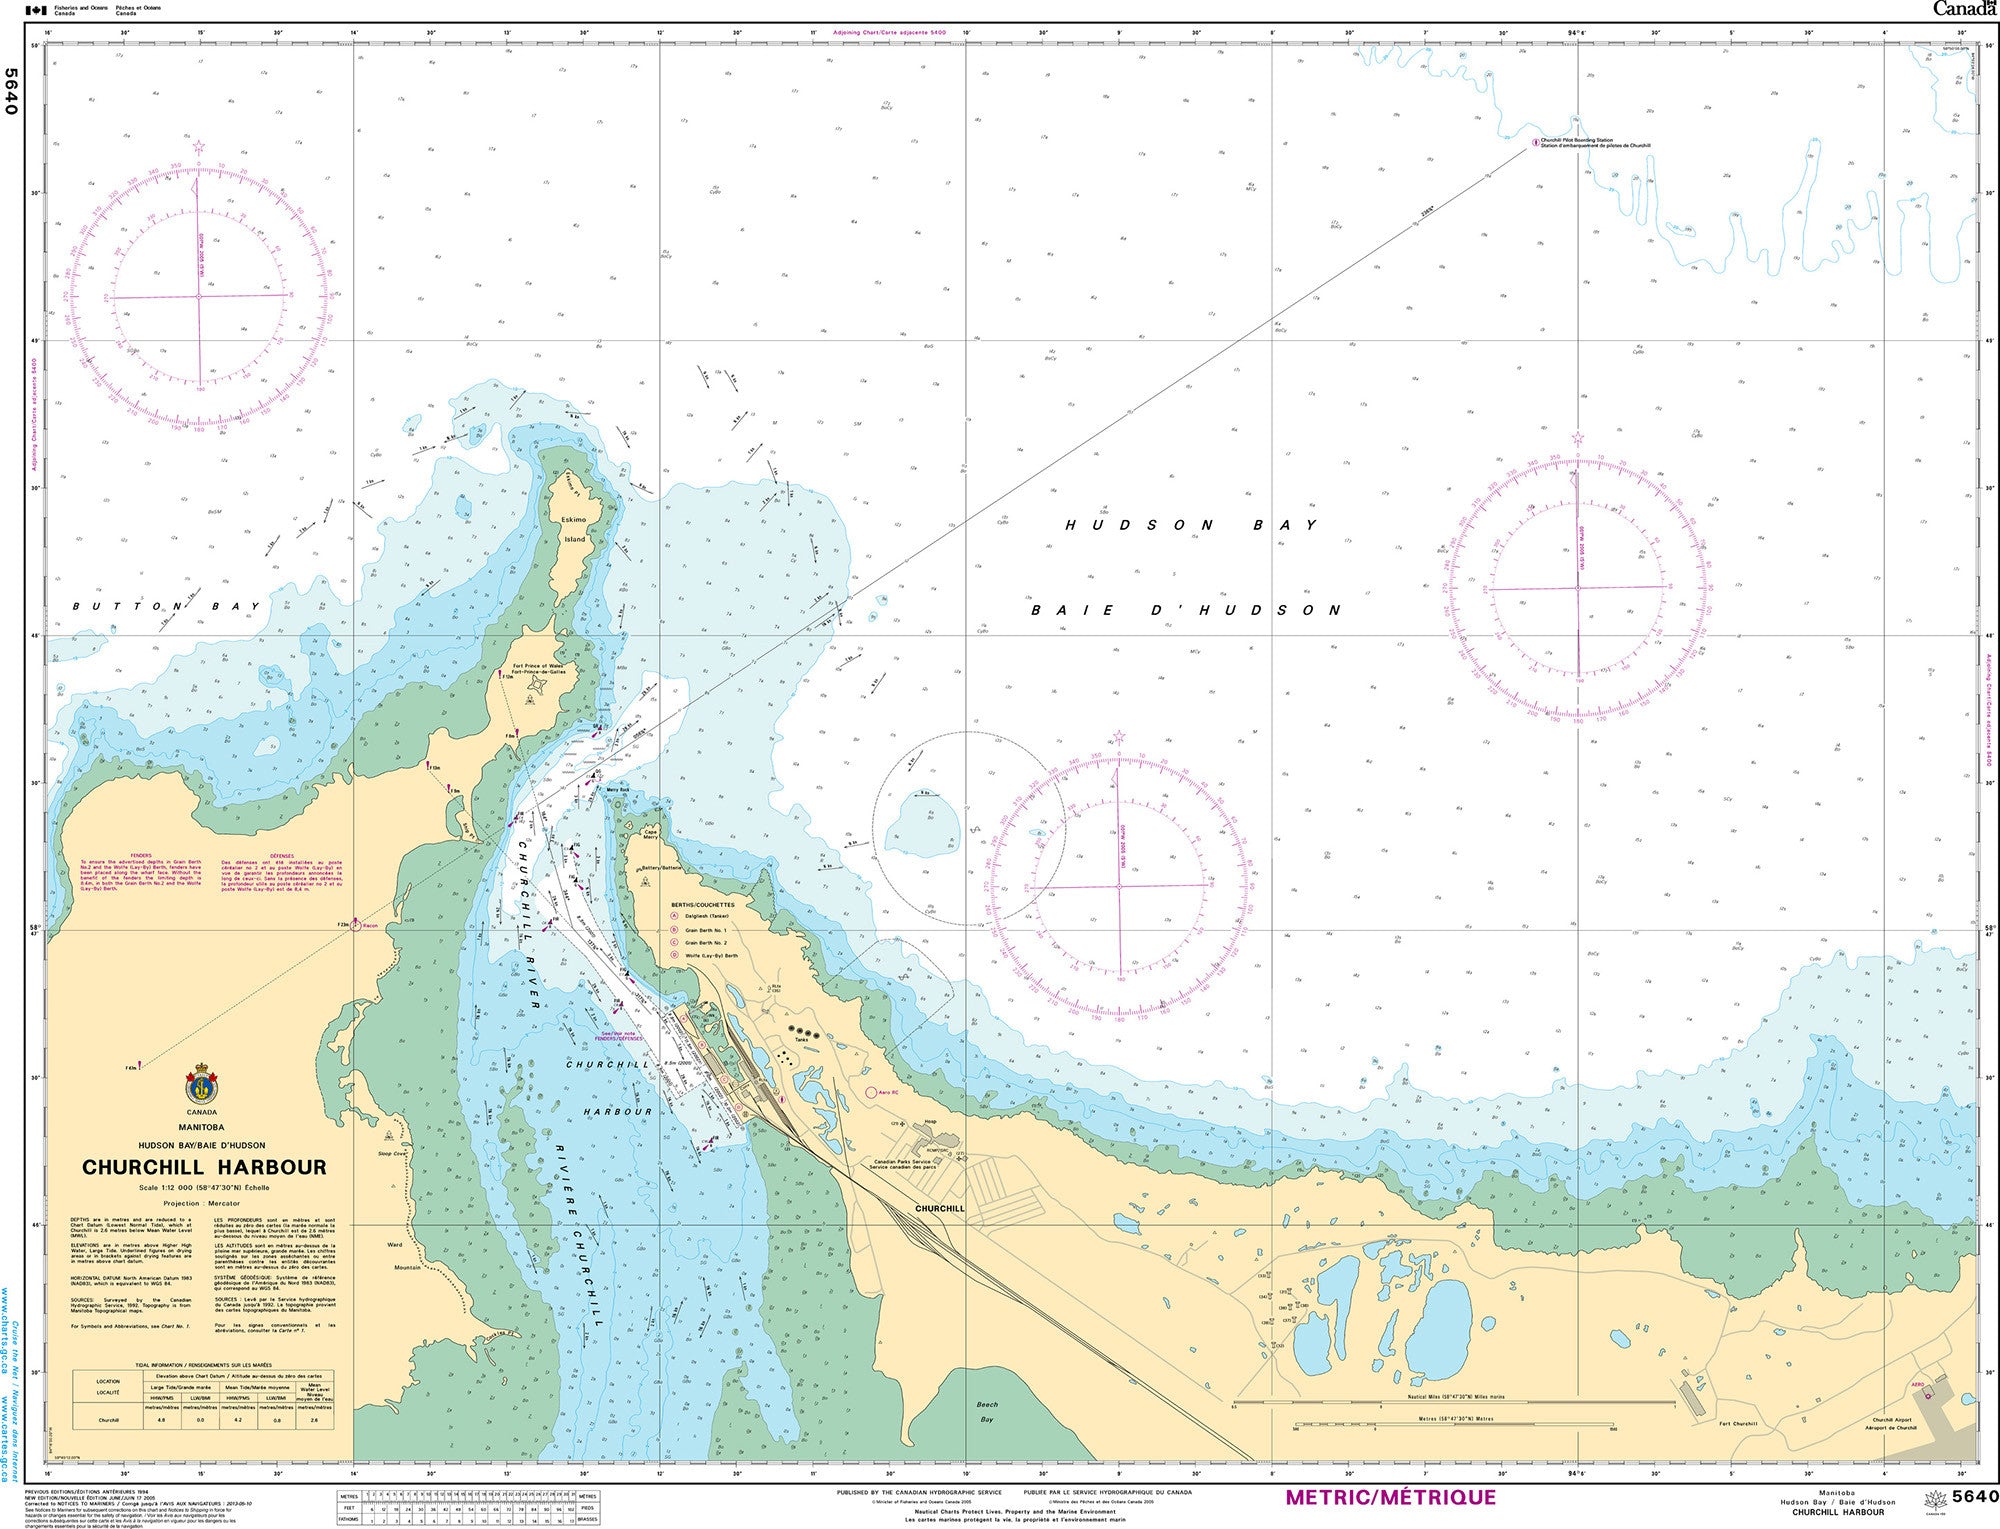 Canadian Hydrographic Service Nautical Chart CHS5640: Churchill Harbour